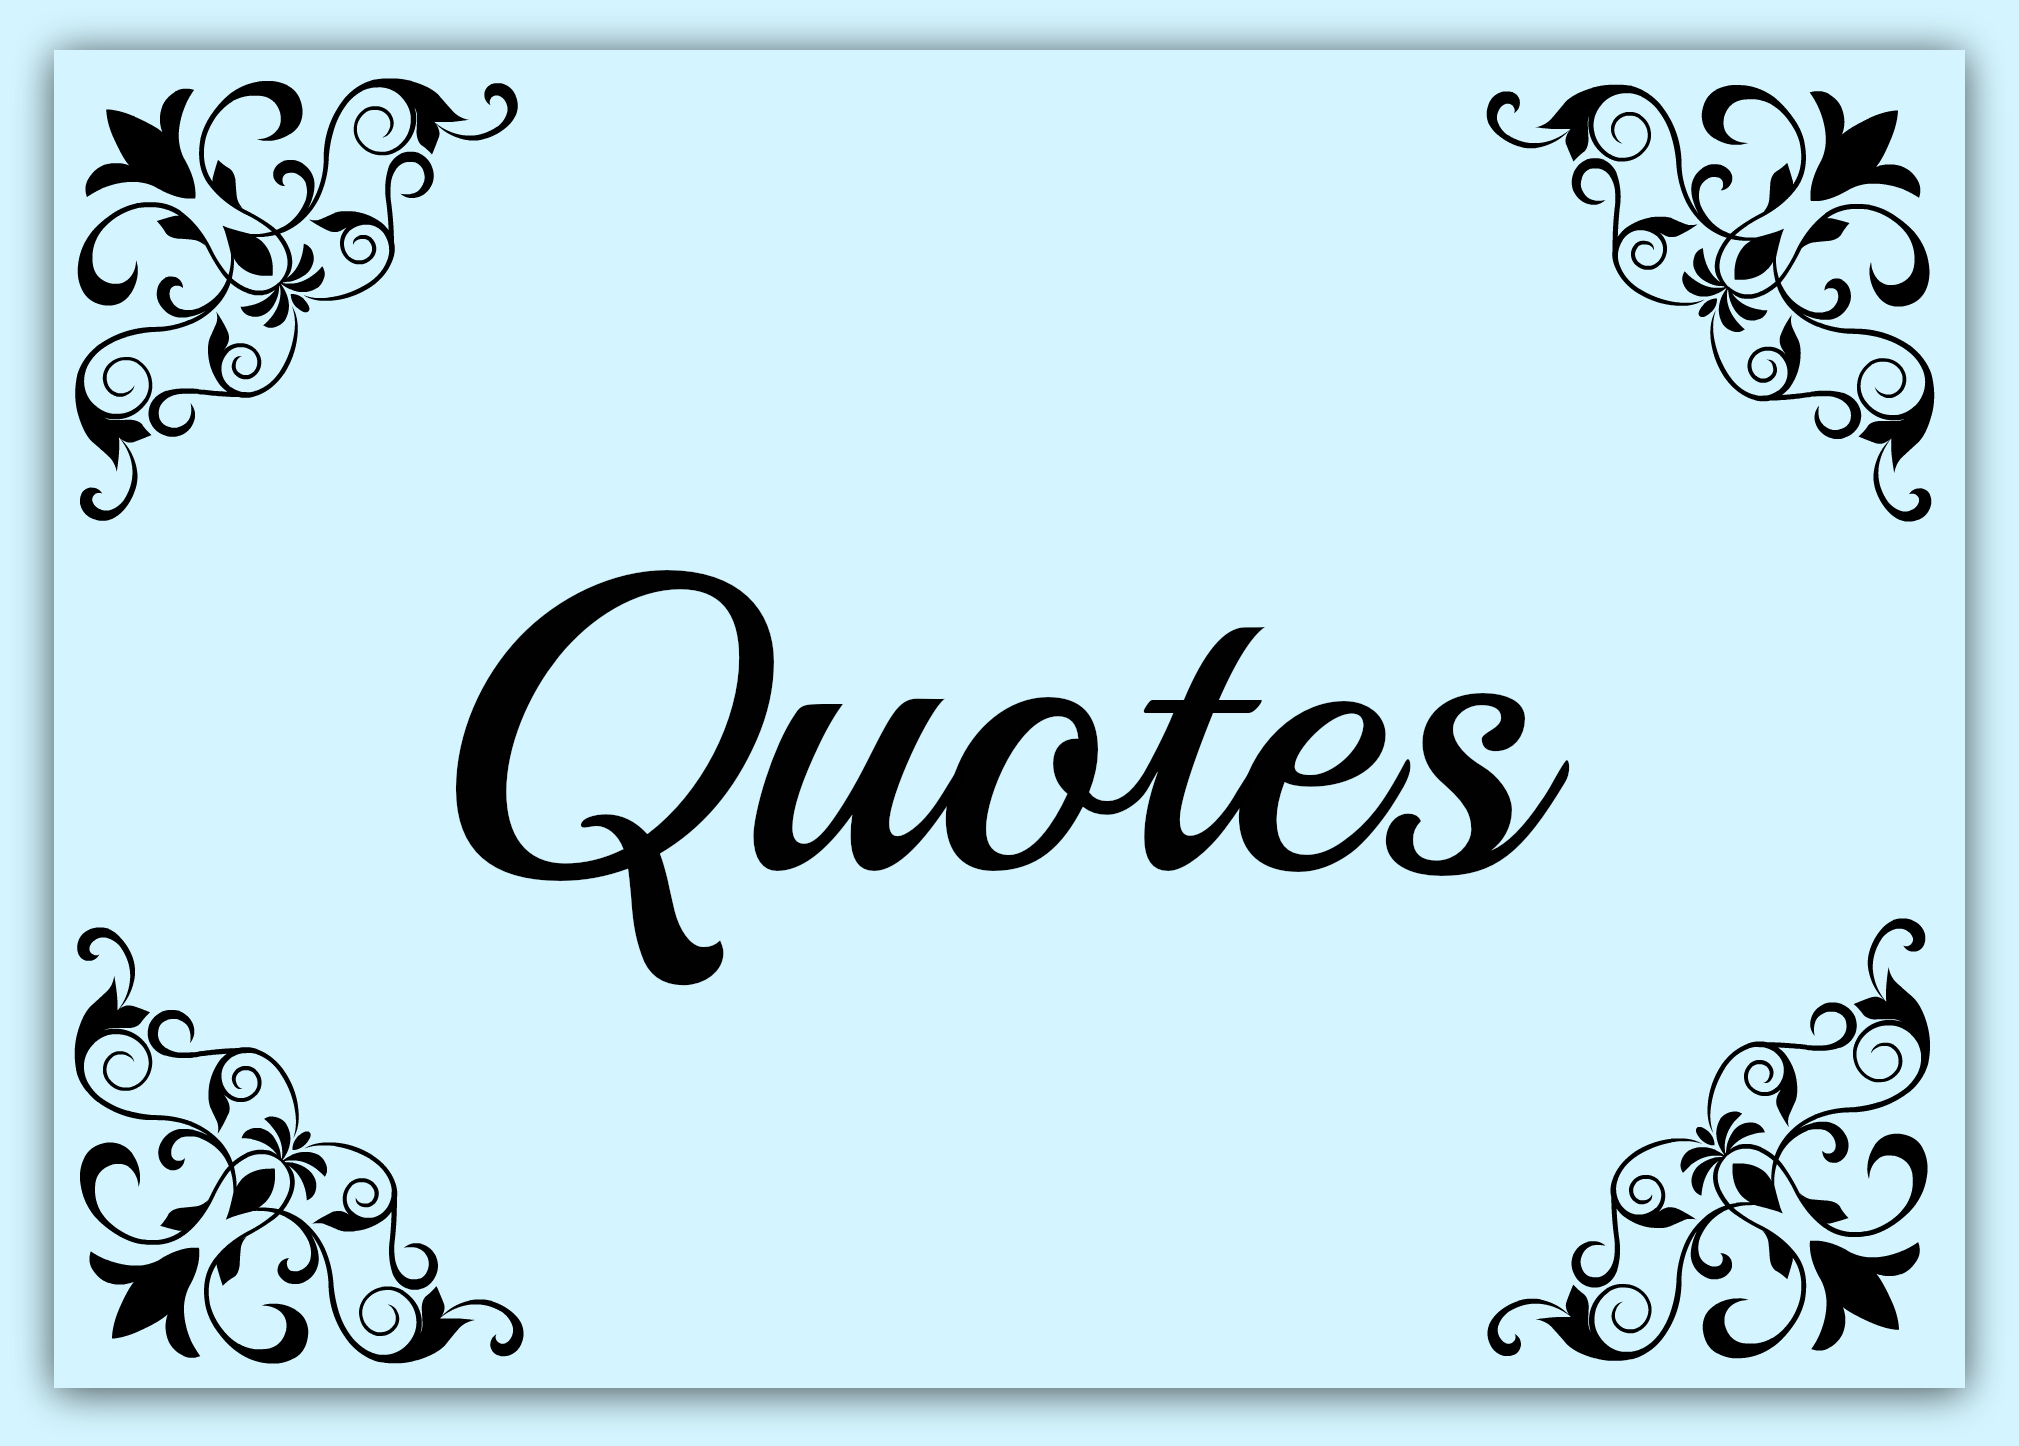 I love quotes When Bryan Hutchinson encouraged fellow writers to blog about 7 quotes we have found helpful in our lives Well I took the challenge My